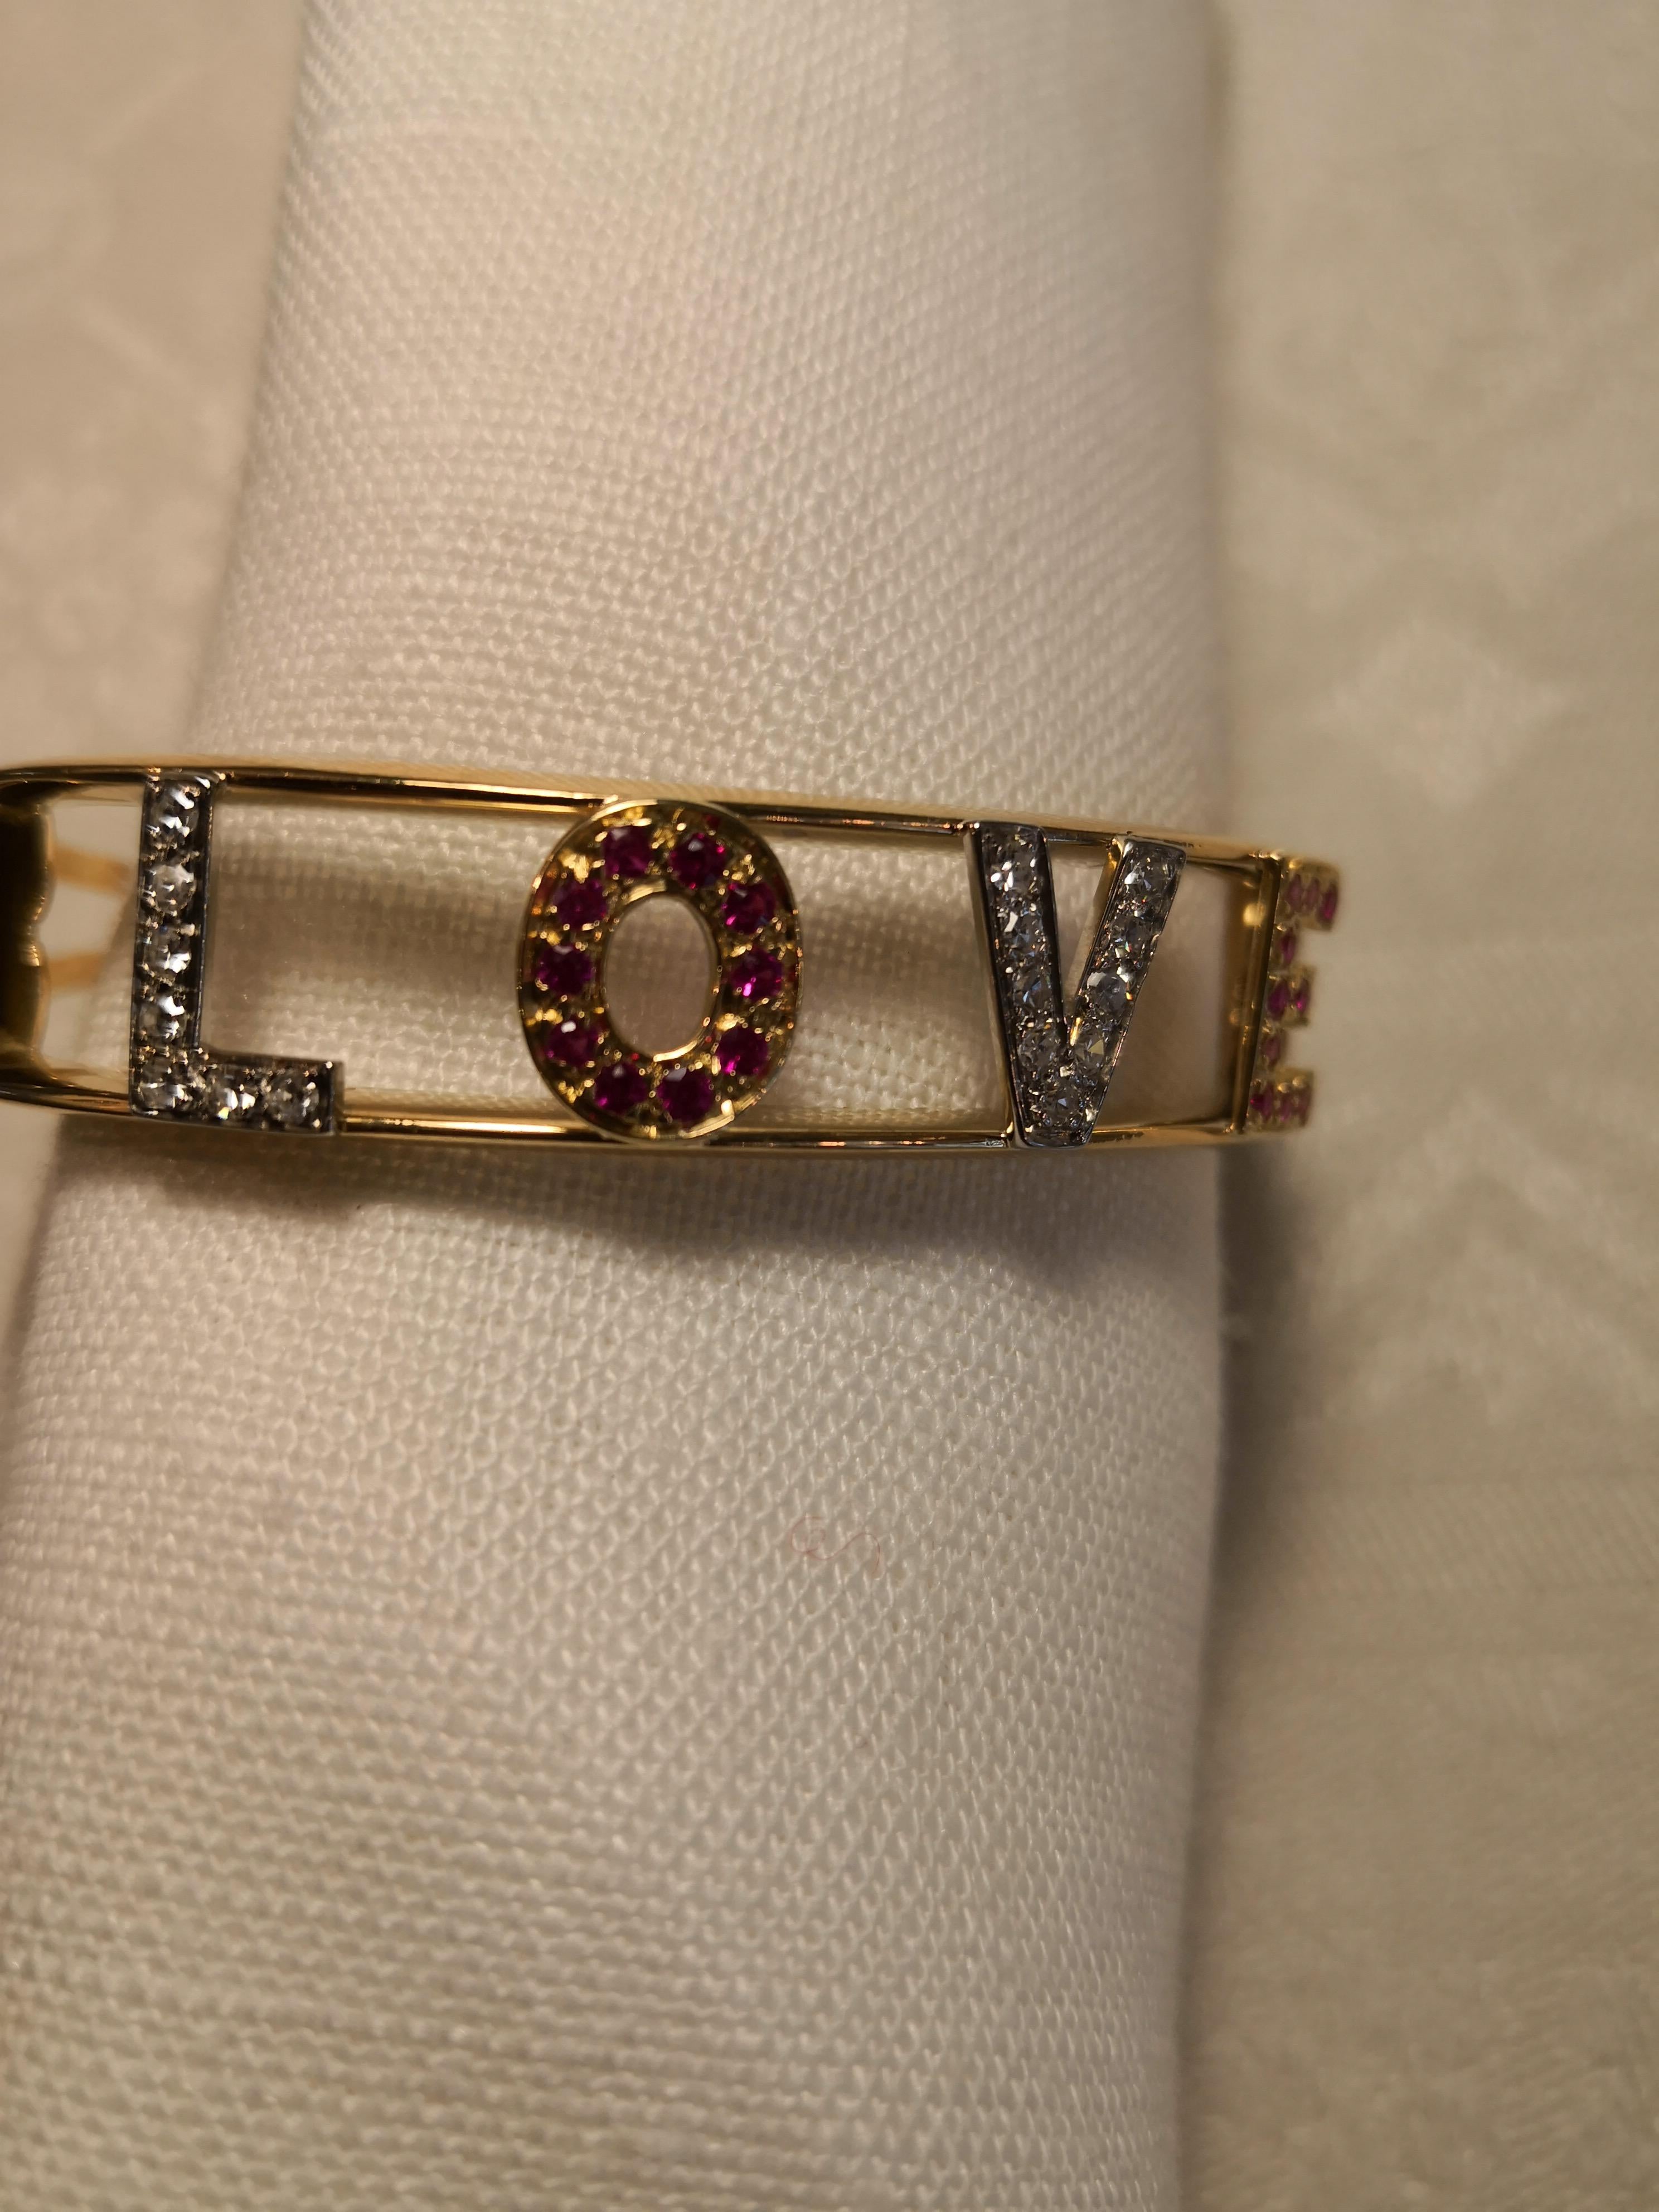 Hand-Crafted Midcentury Gold Bracelet Love with Diamonds and Rubis Handmade from Italy